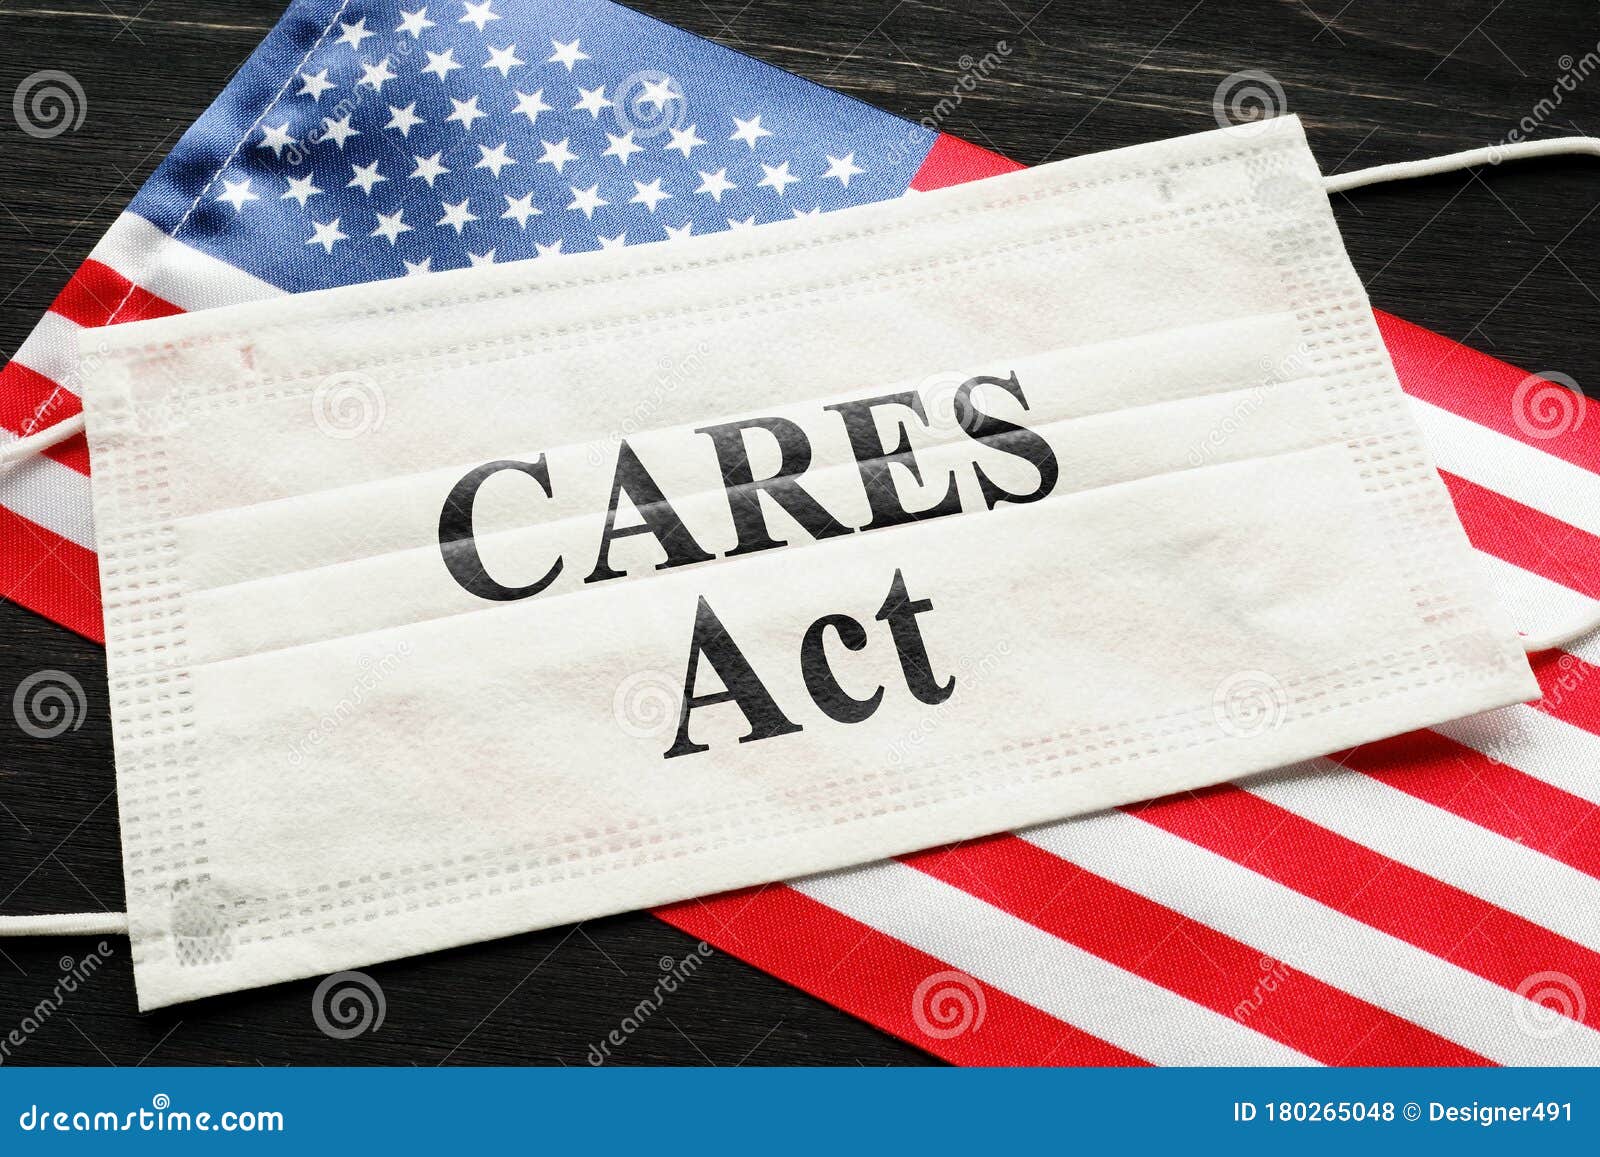 american flag and mask with sign cares act. coronavirus aid, relief, and economic security law concept